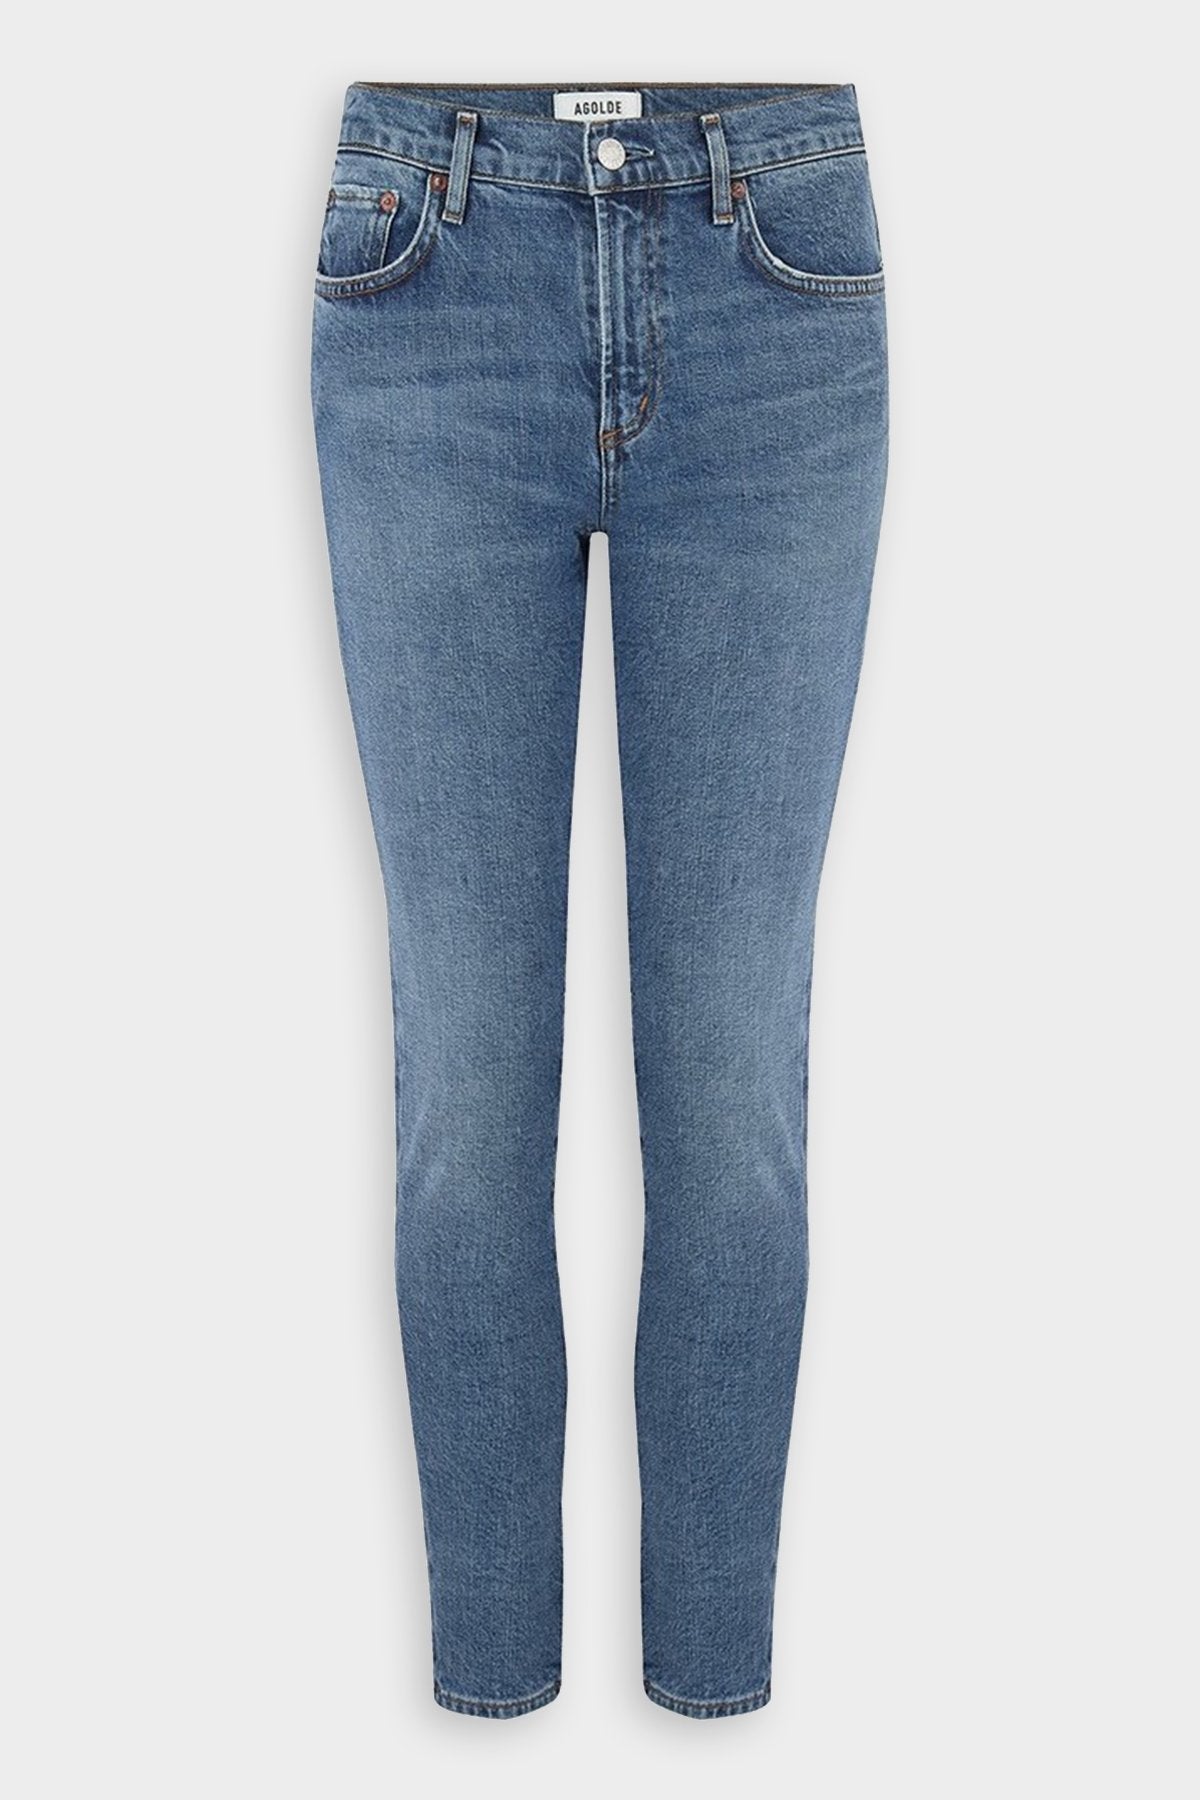 Toni Mid Rise Straight Jean in Viewpoint - shop-olivia.com